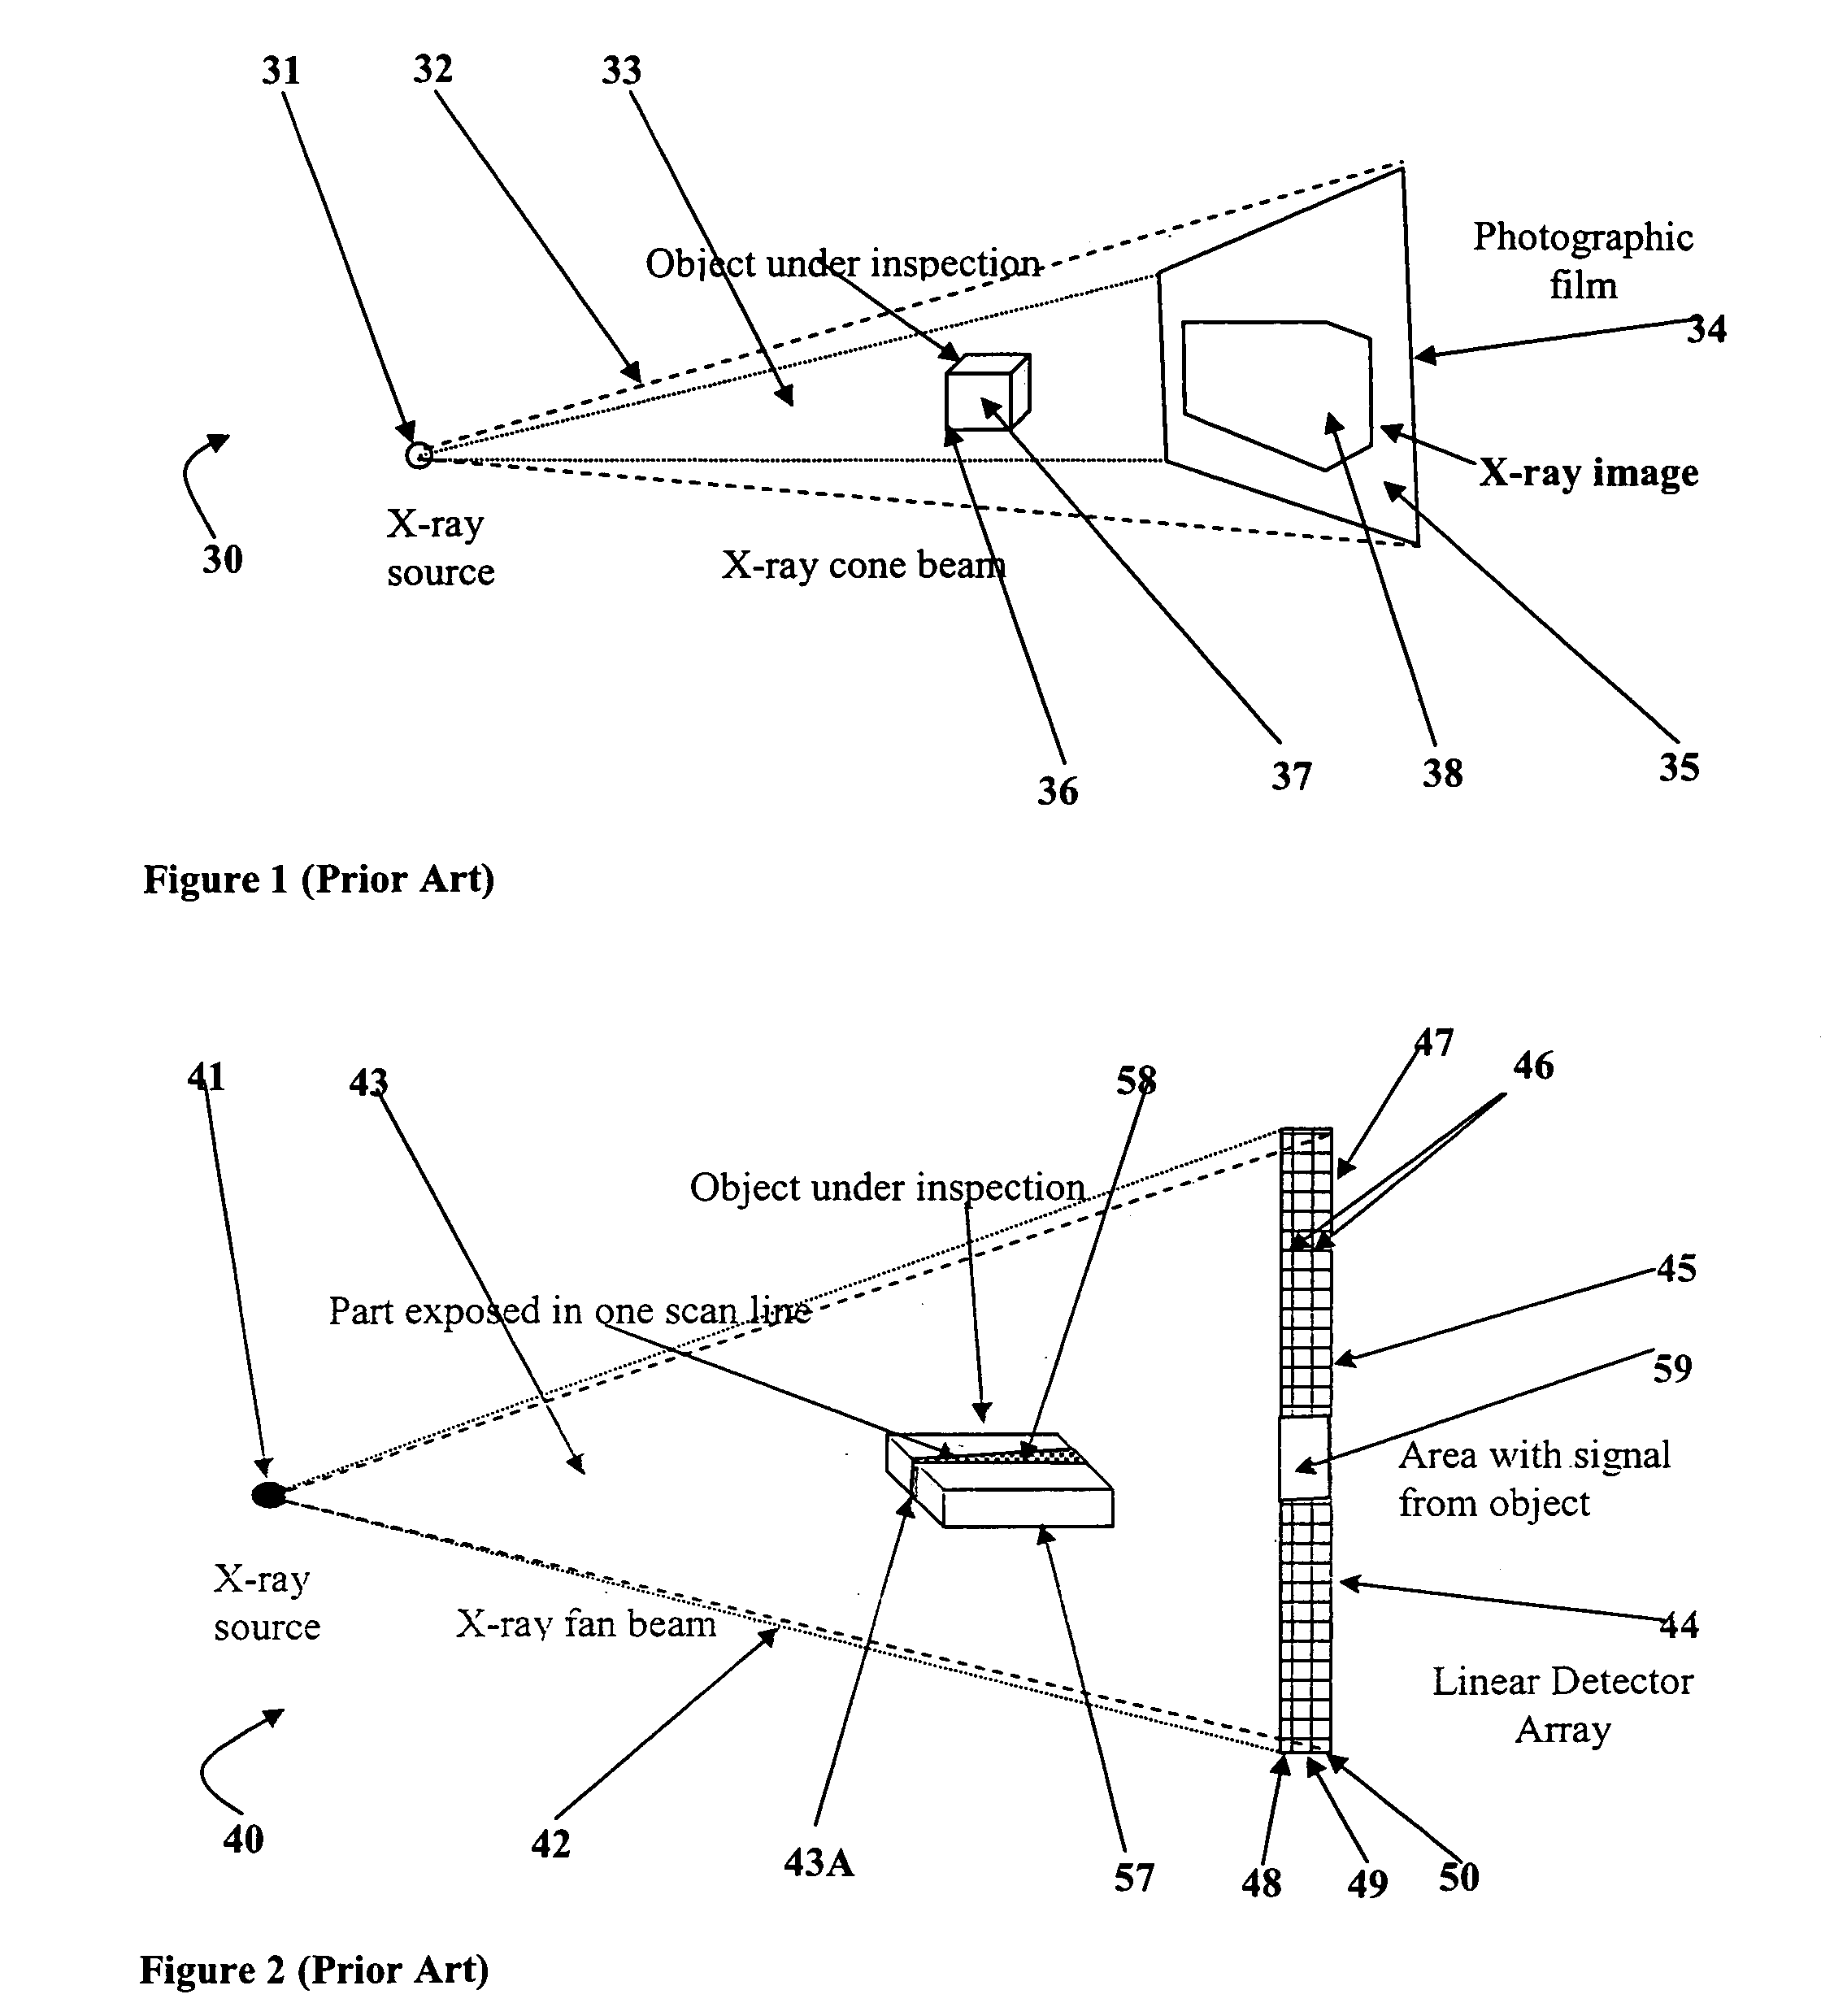 Time share digital integration method and apparatus for processing X-ray images